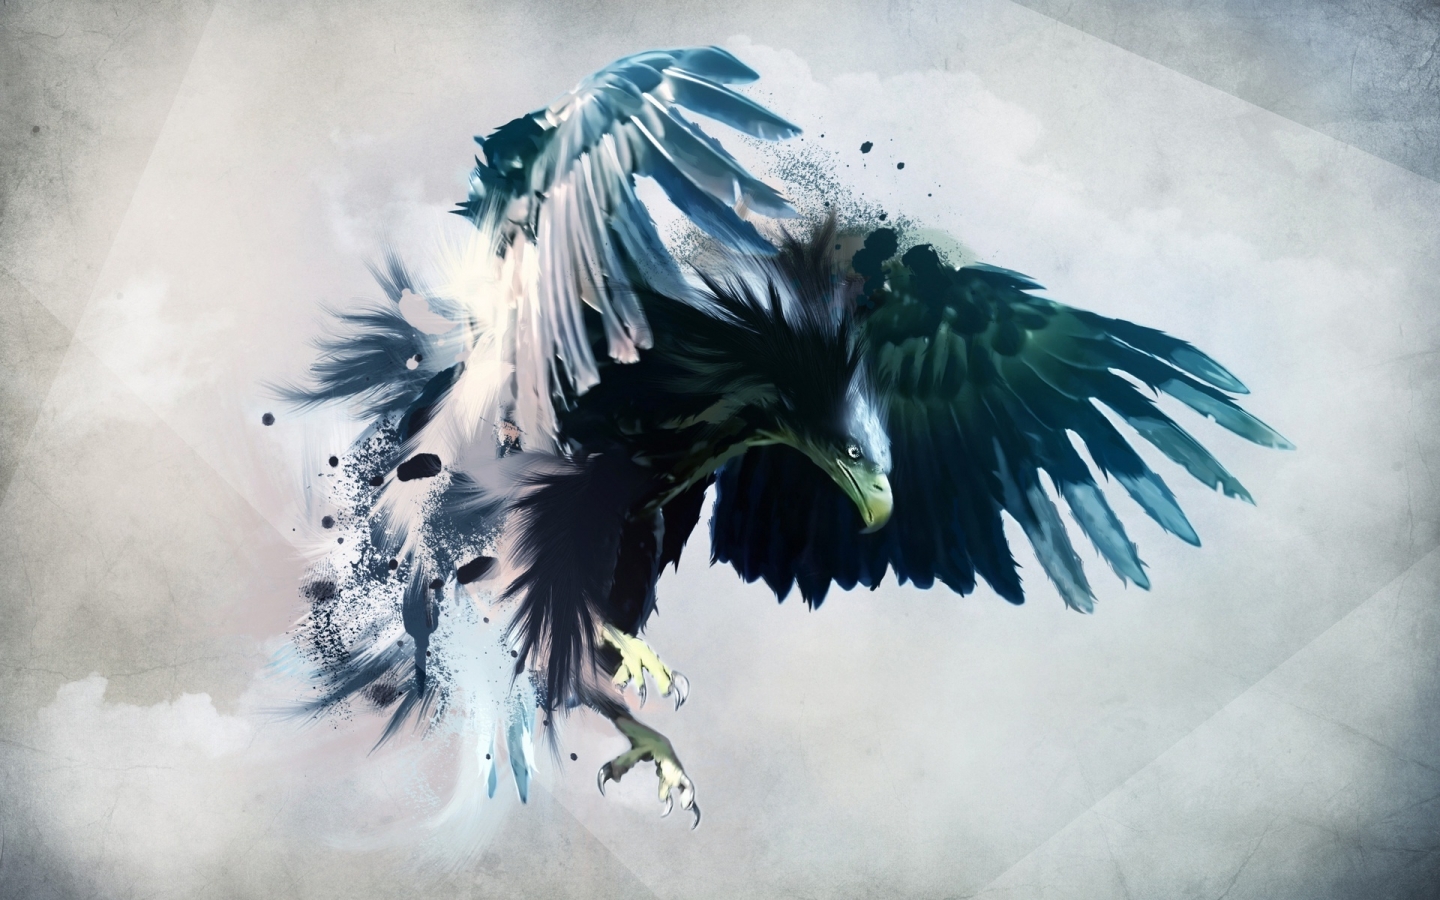 Digital Eagle for 1440 x 900 widescreen resolution